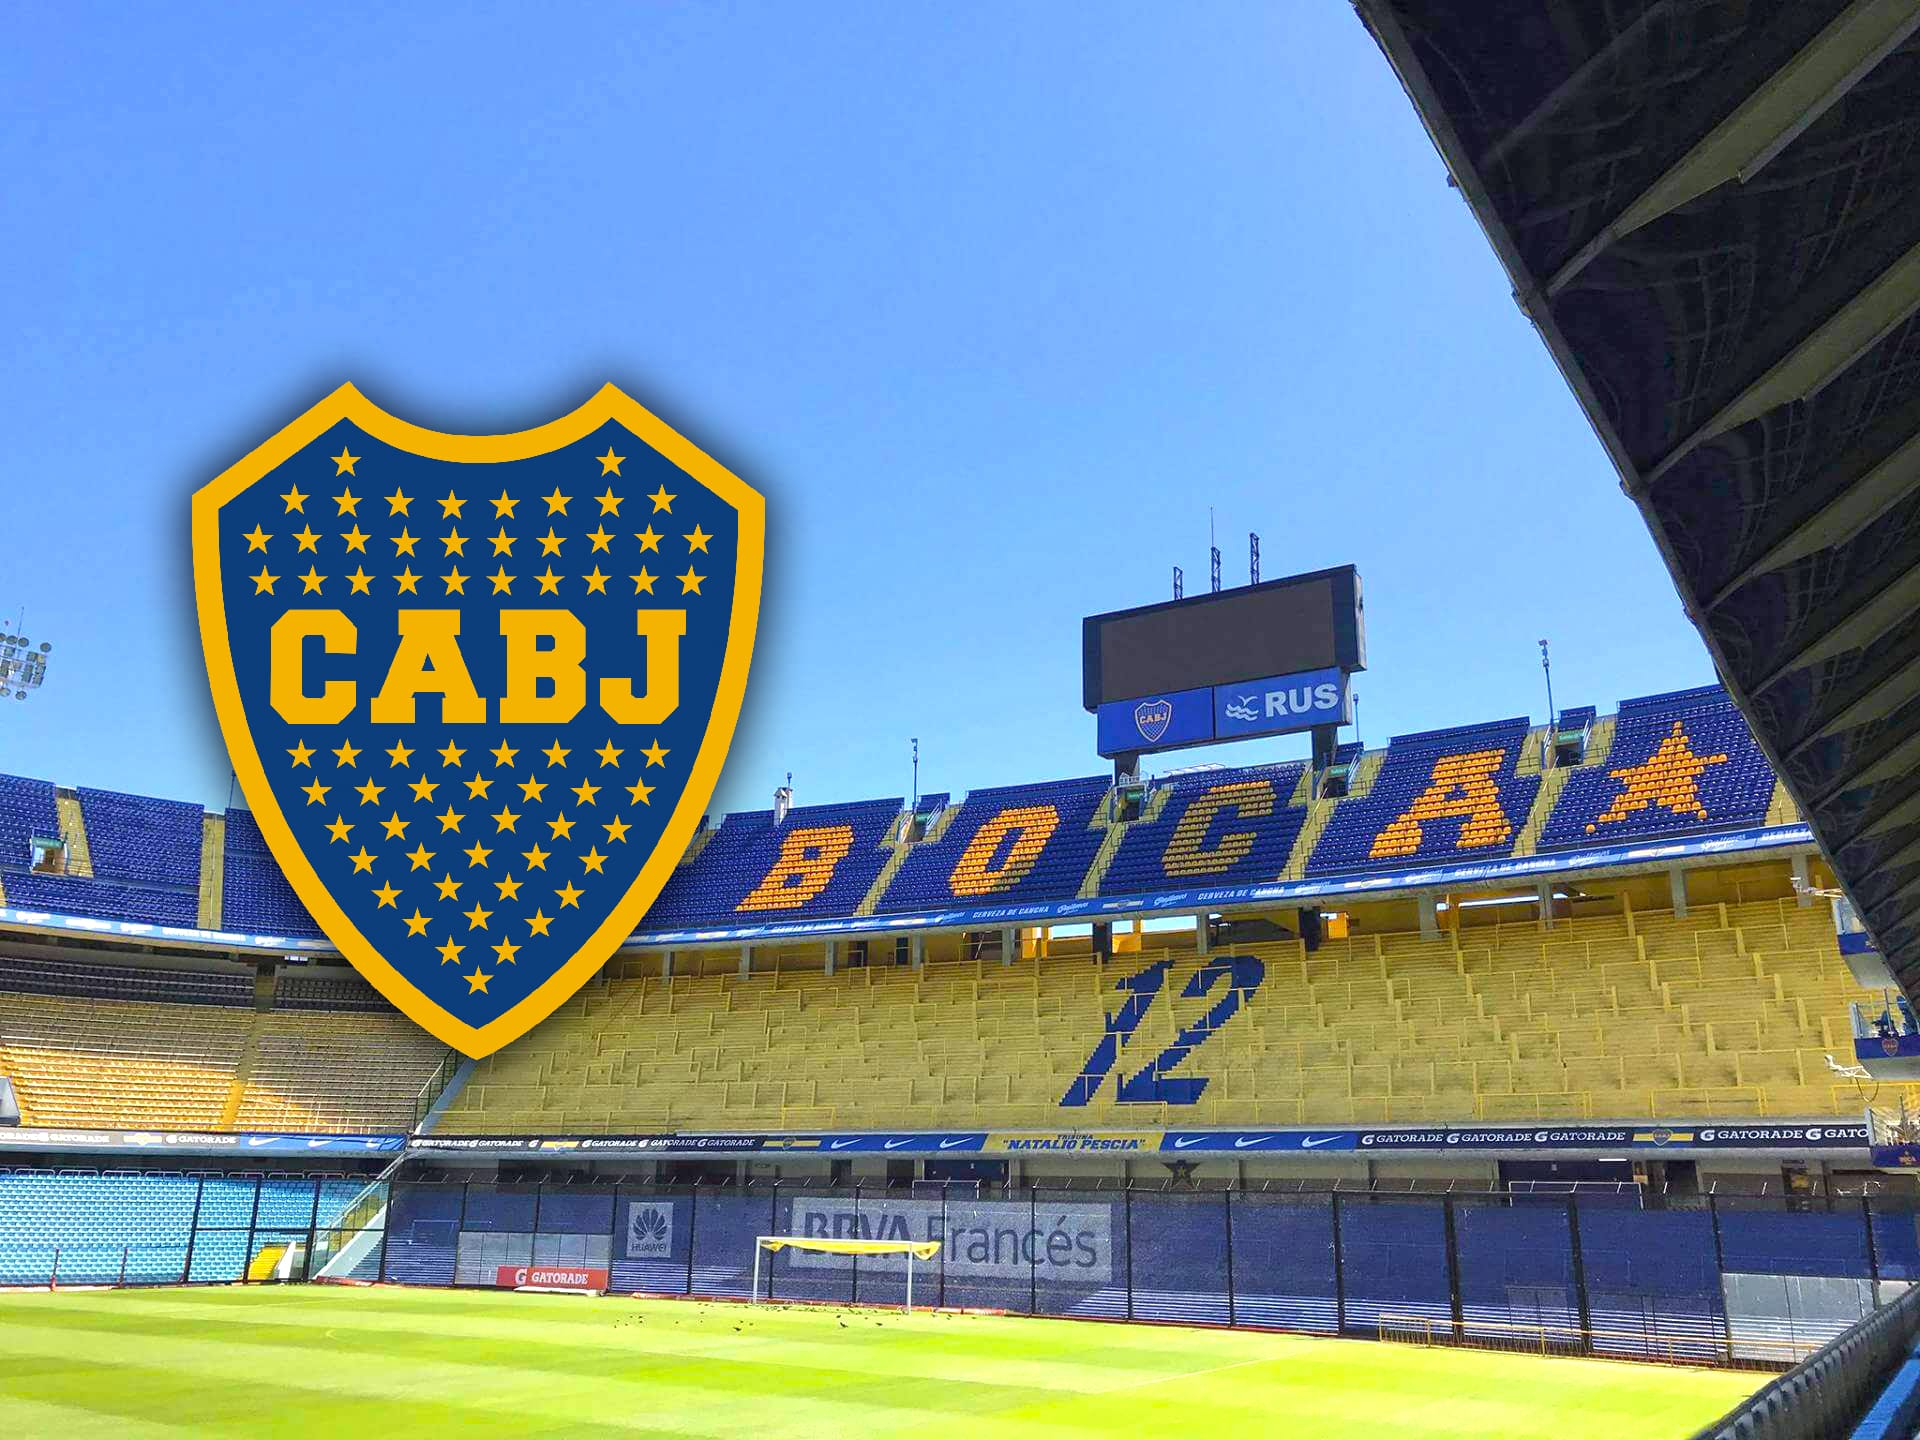 How to buy tickets for Boca Juniors as a tourist [UPDATE 2022]